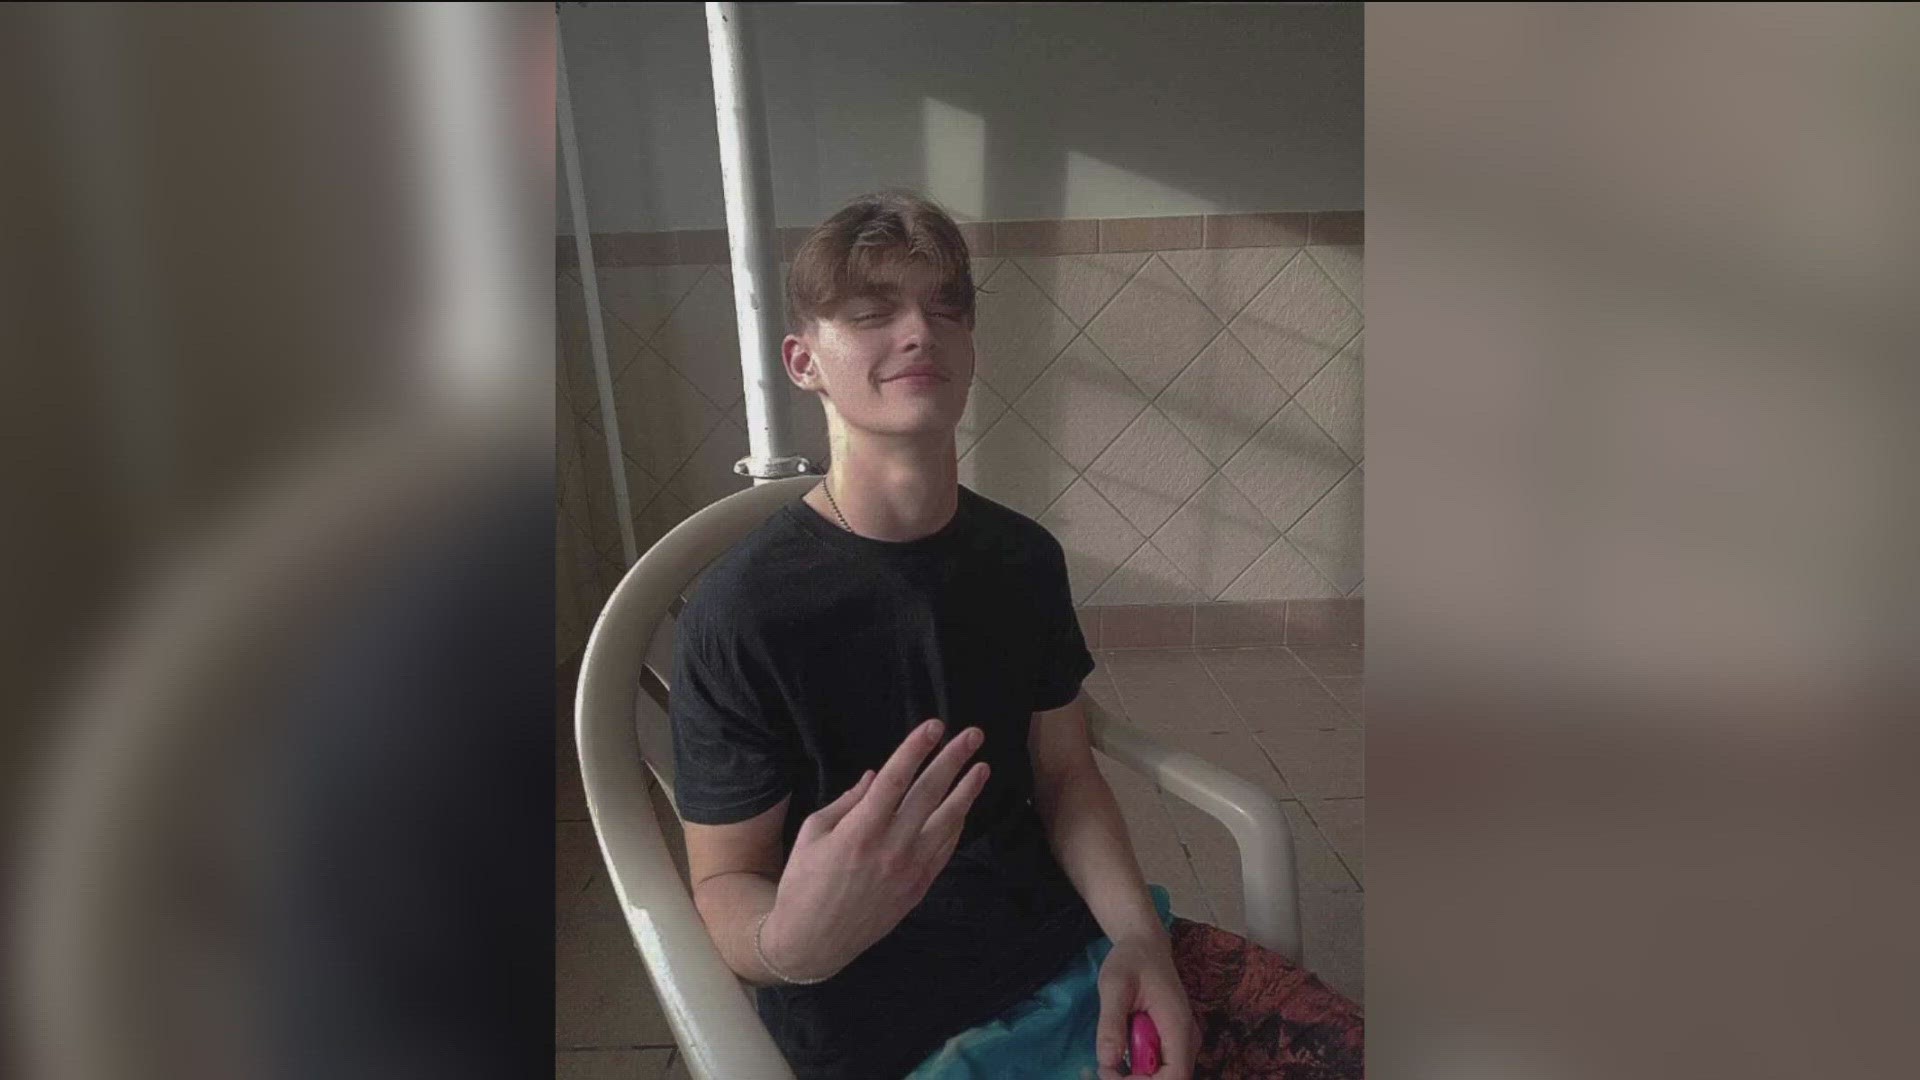 The family of a 15-year-old killed in a Fort Smith shooting speaks out.